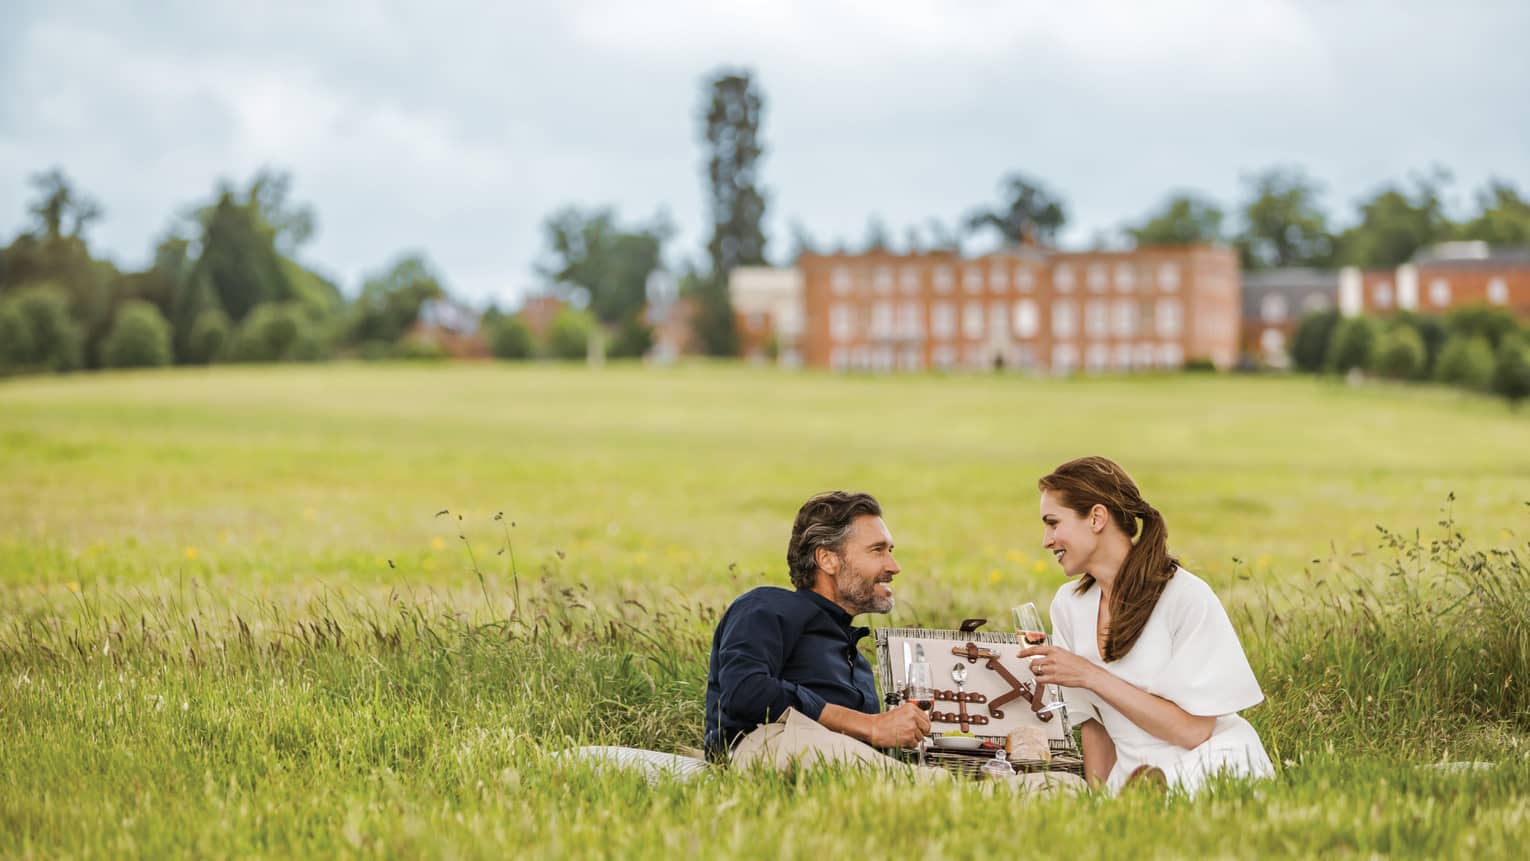 Couple with wine glasses lies in tall green grass with open picnic basket, hotel manor in background